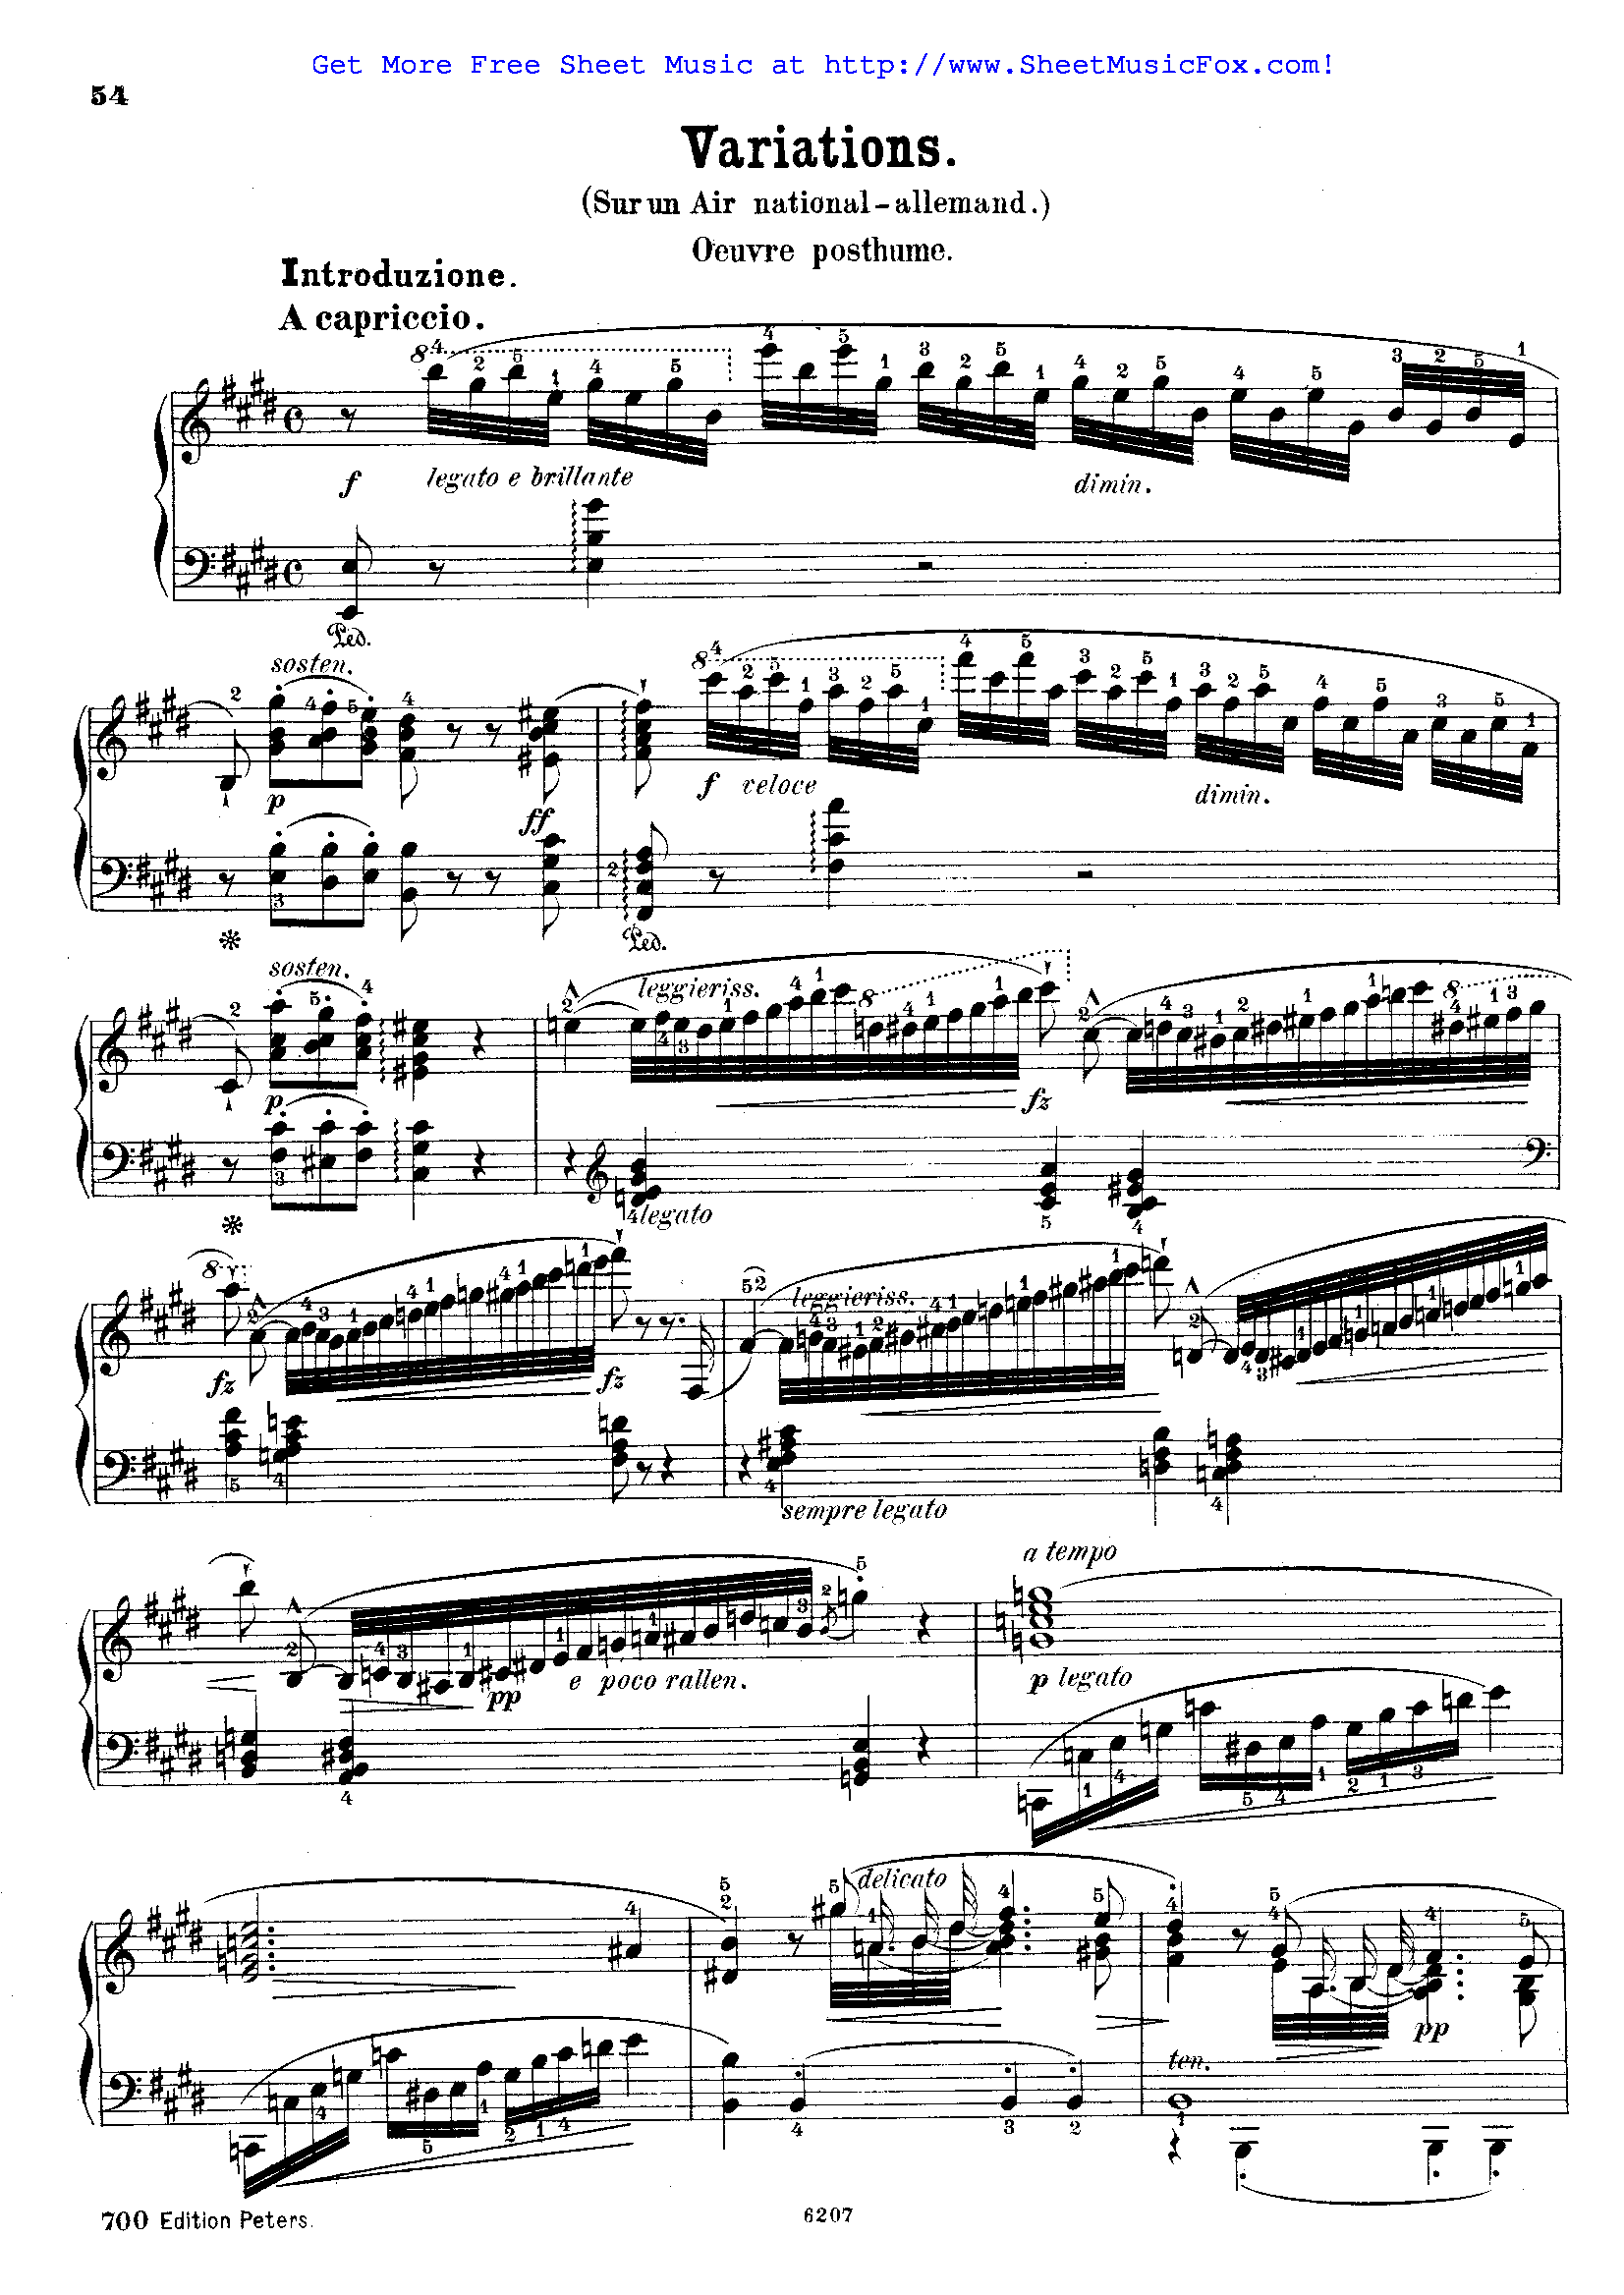 Free sheet music for Variations sur un air national allemand, B.14